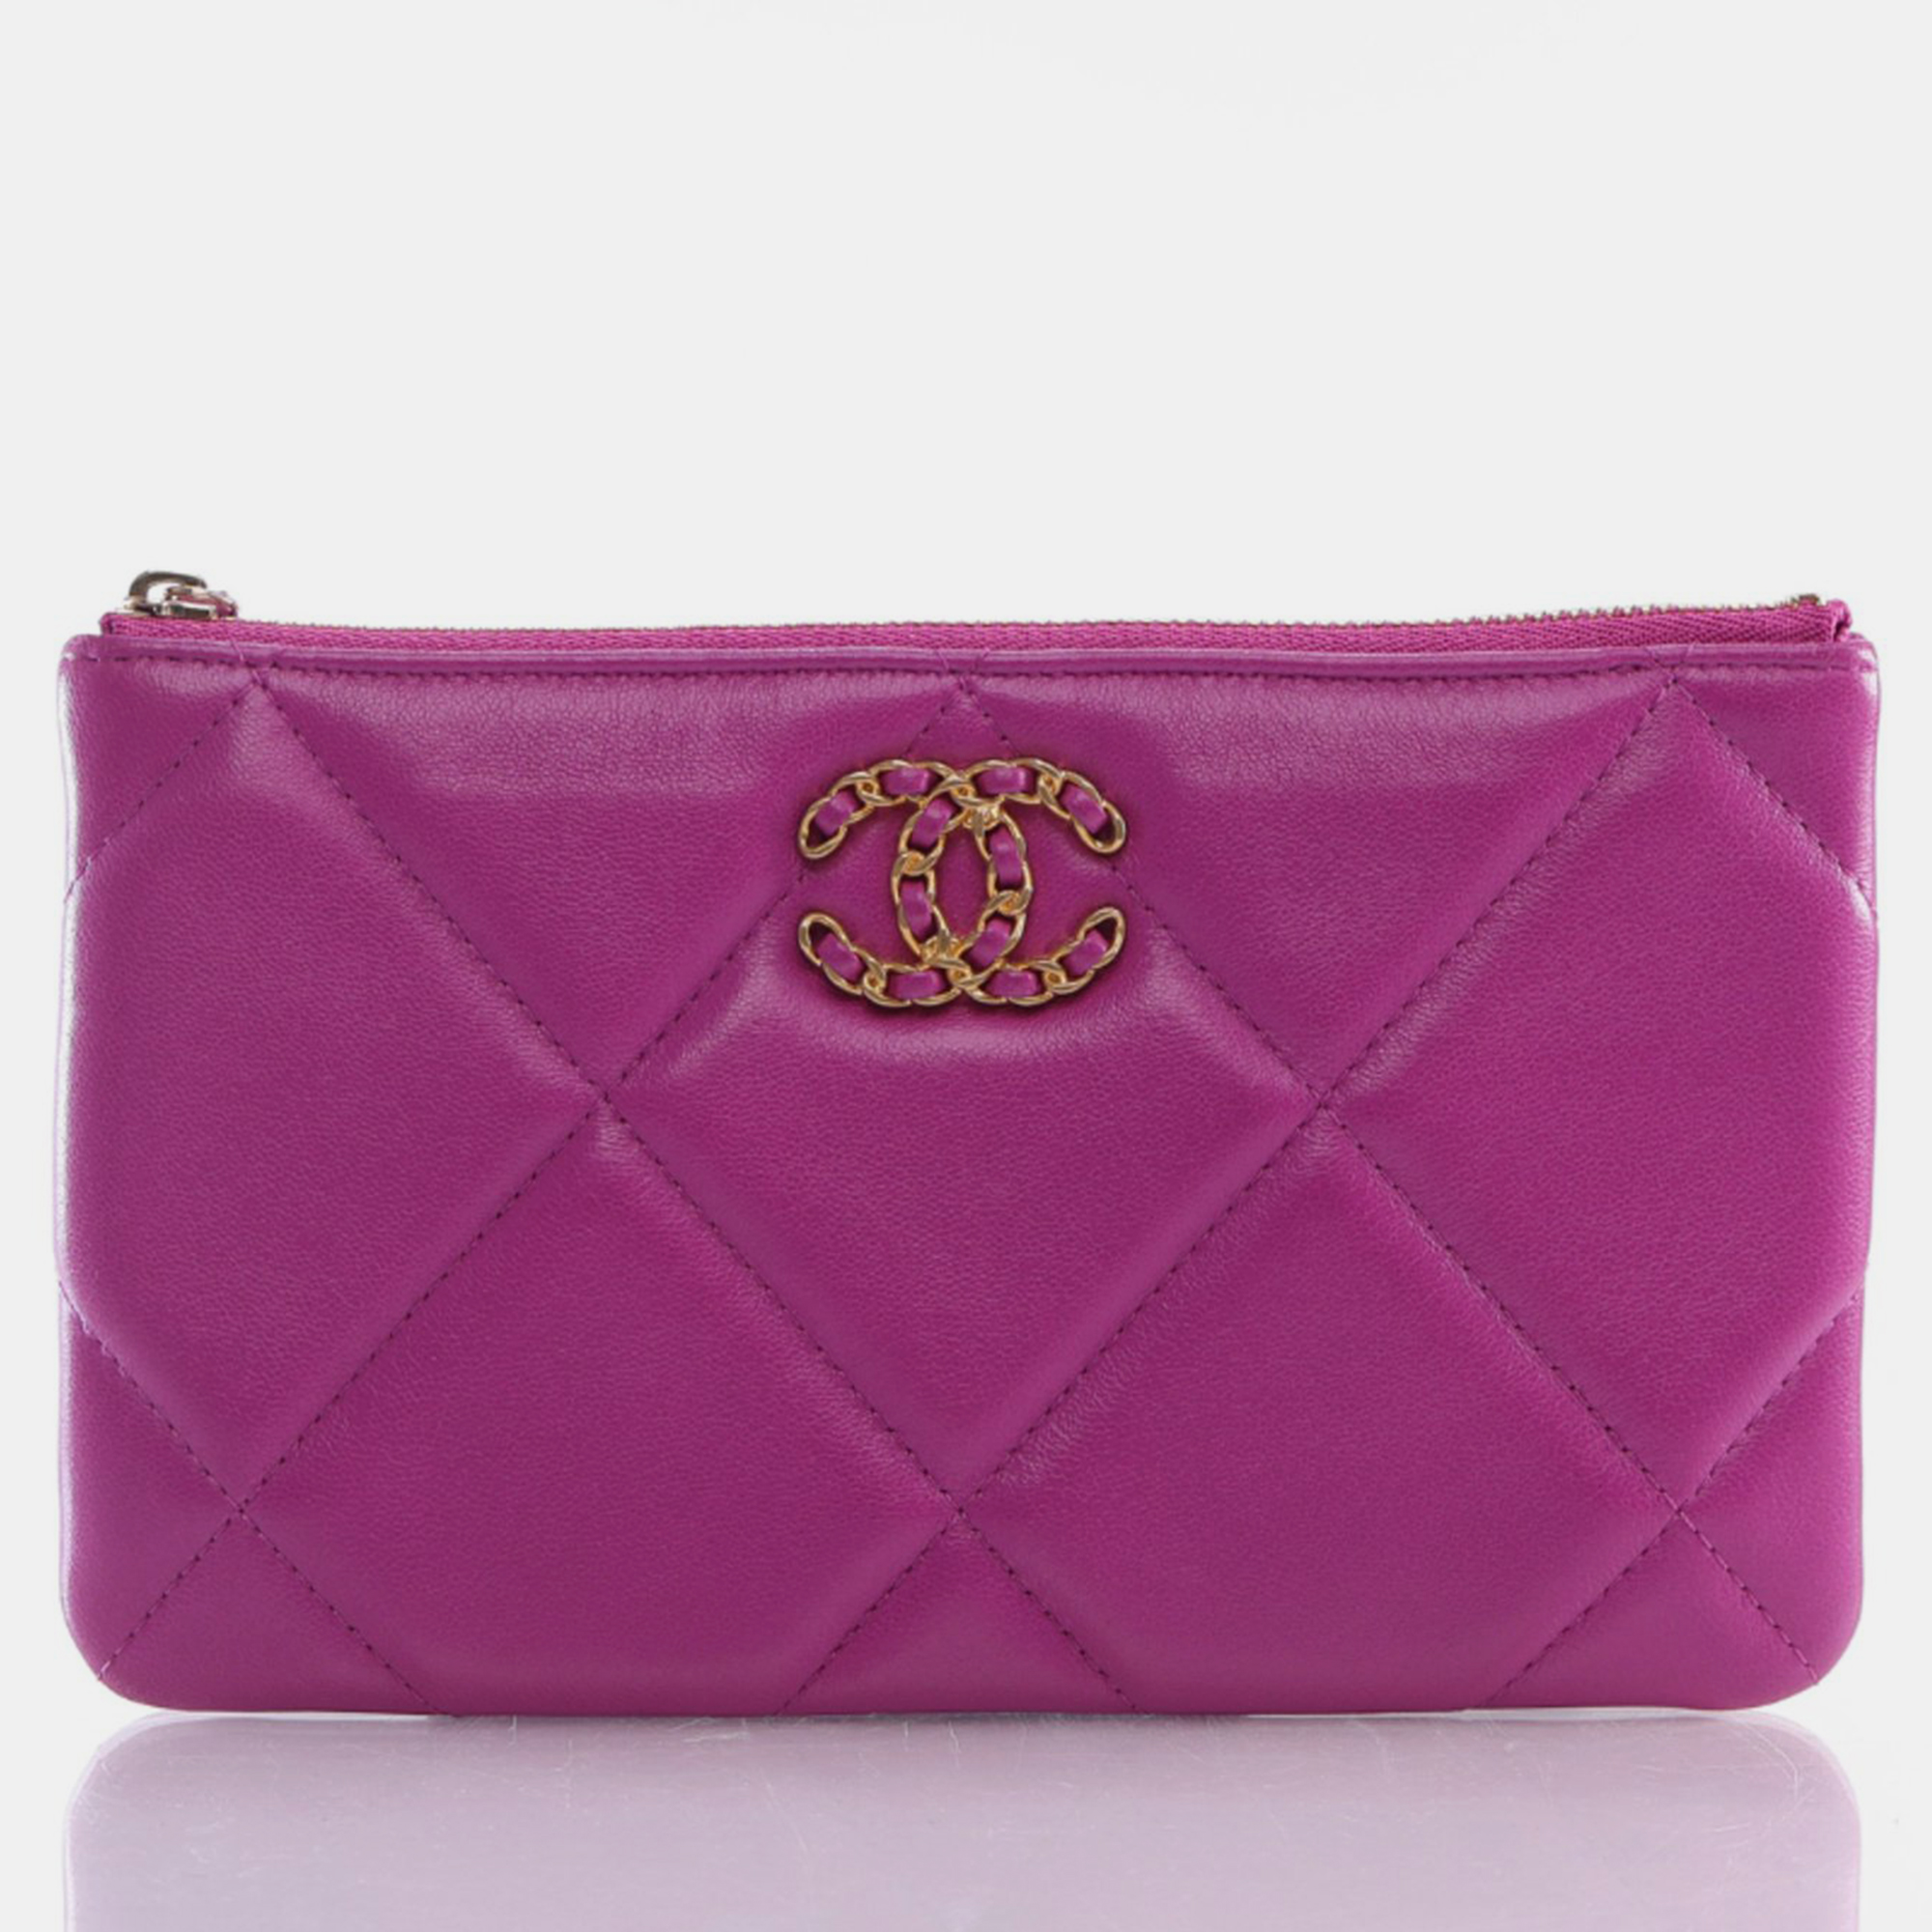 Chanel purple quilted lambskin leather 19 pouch/ wallet